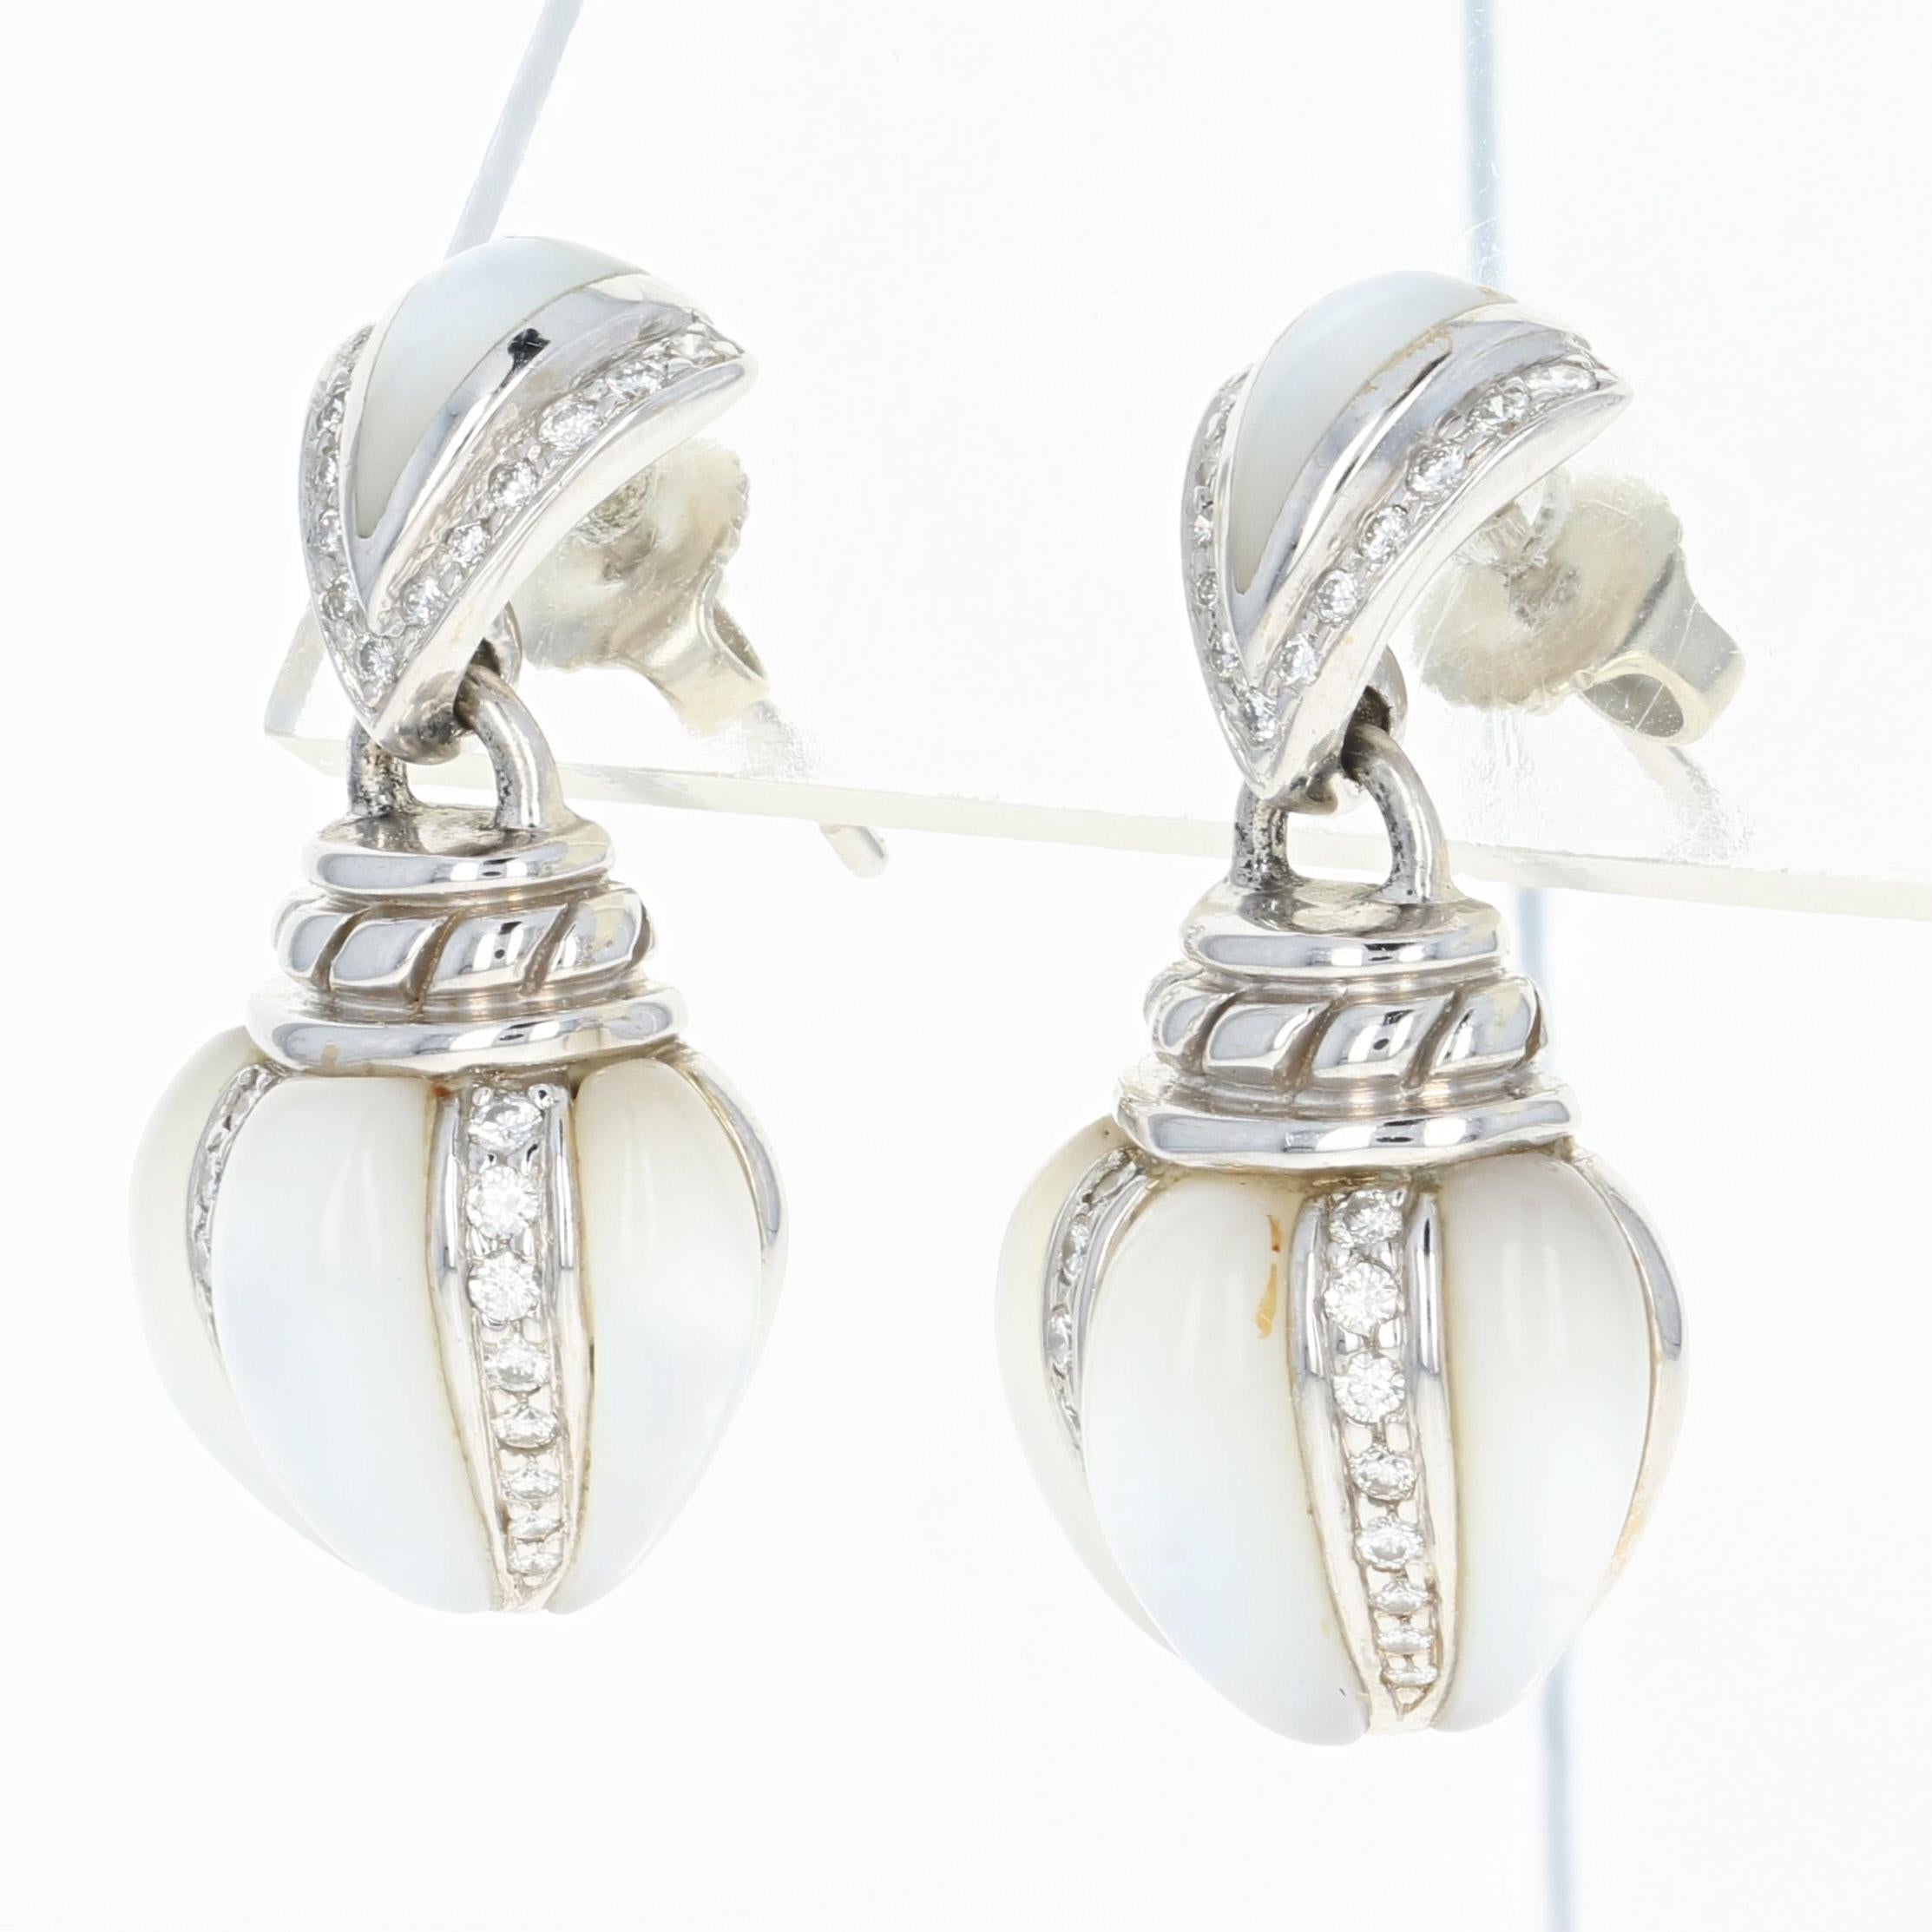 Regal Beauty! Crafted by Kabana in luxurious 18k white gold, this NEW pair of earrings are fashioned in a mesmerizing drop style which showcases luminous mother of pearl and icy white diamond accents. You are sure to be the belle of the ball wearing